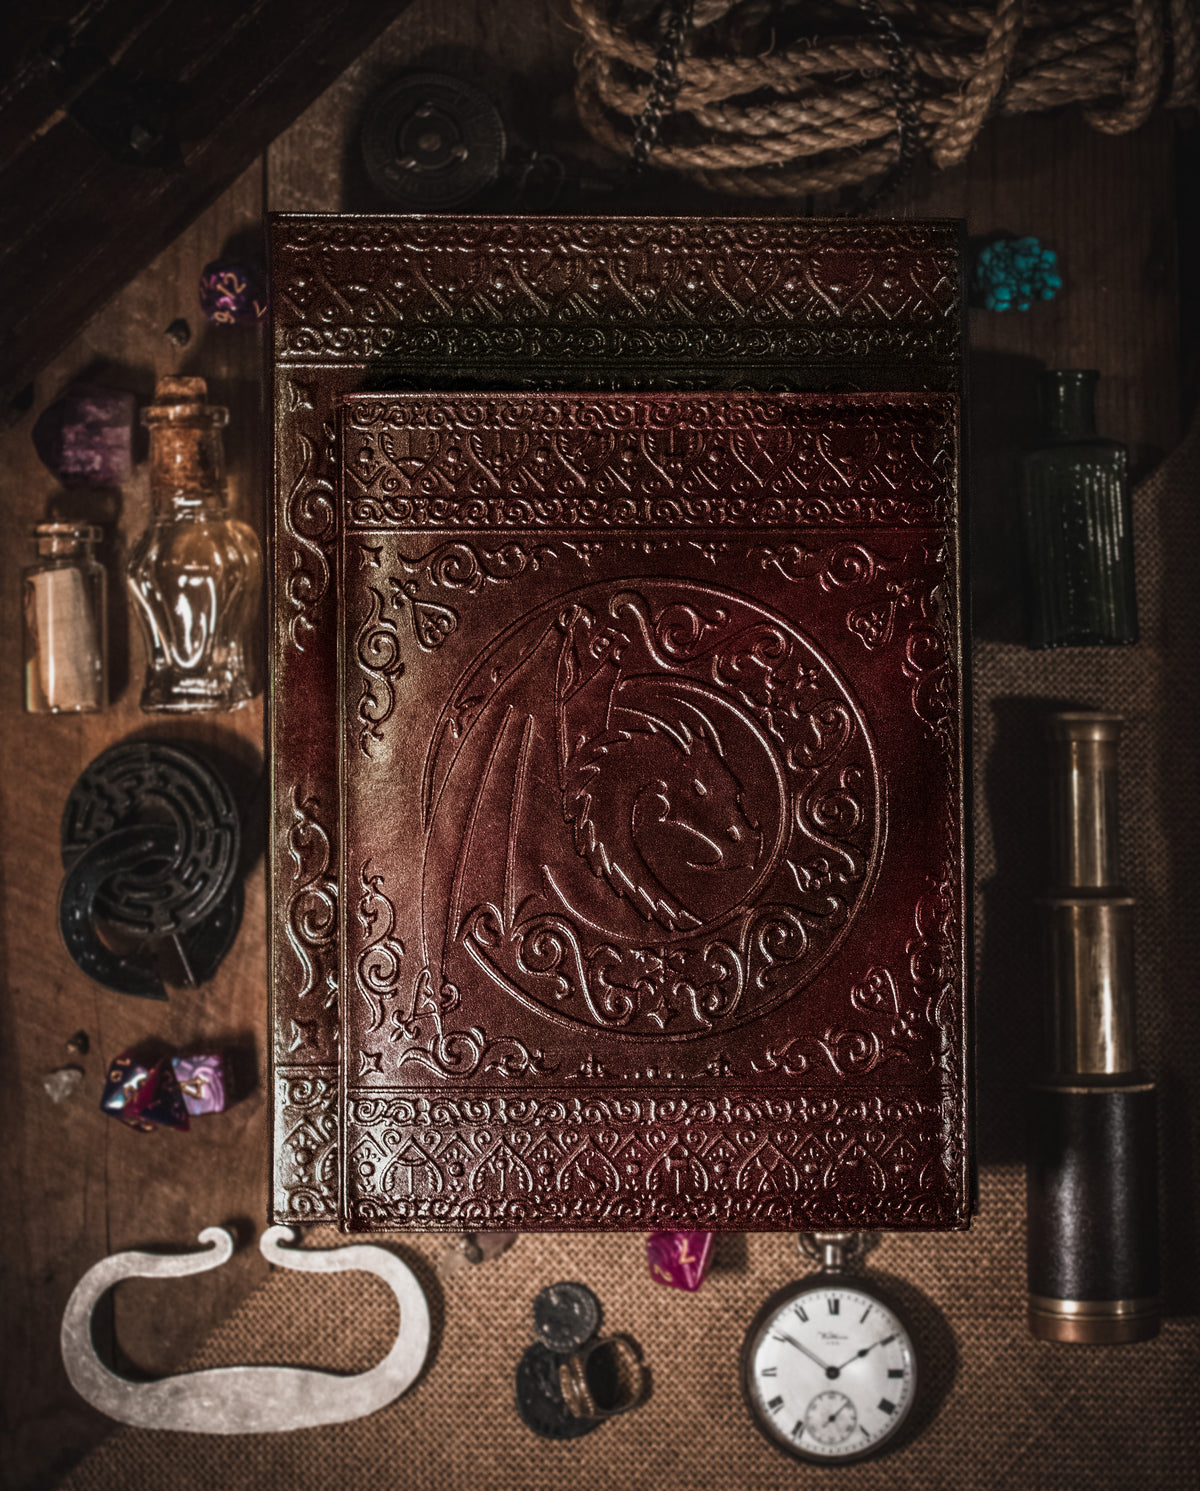 Dungeon Master (Refillable) Real Leather Notebook | Journal | Sketchbook | Campaign Log